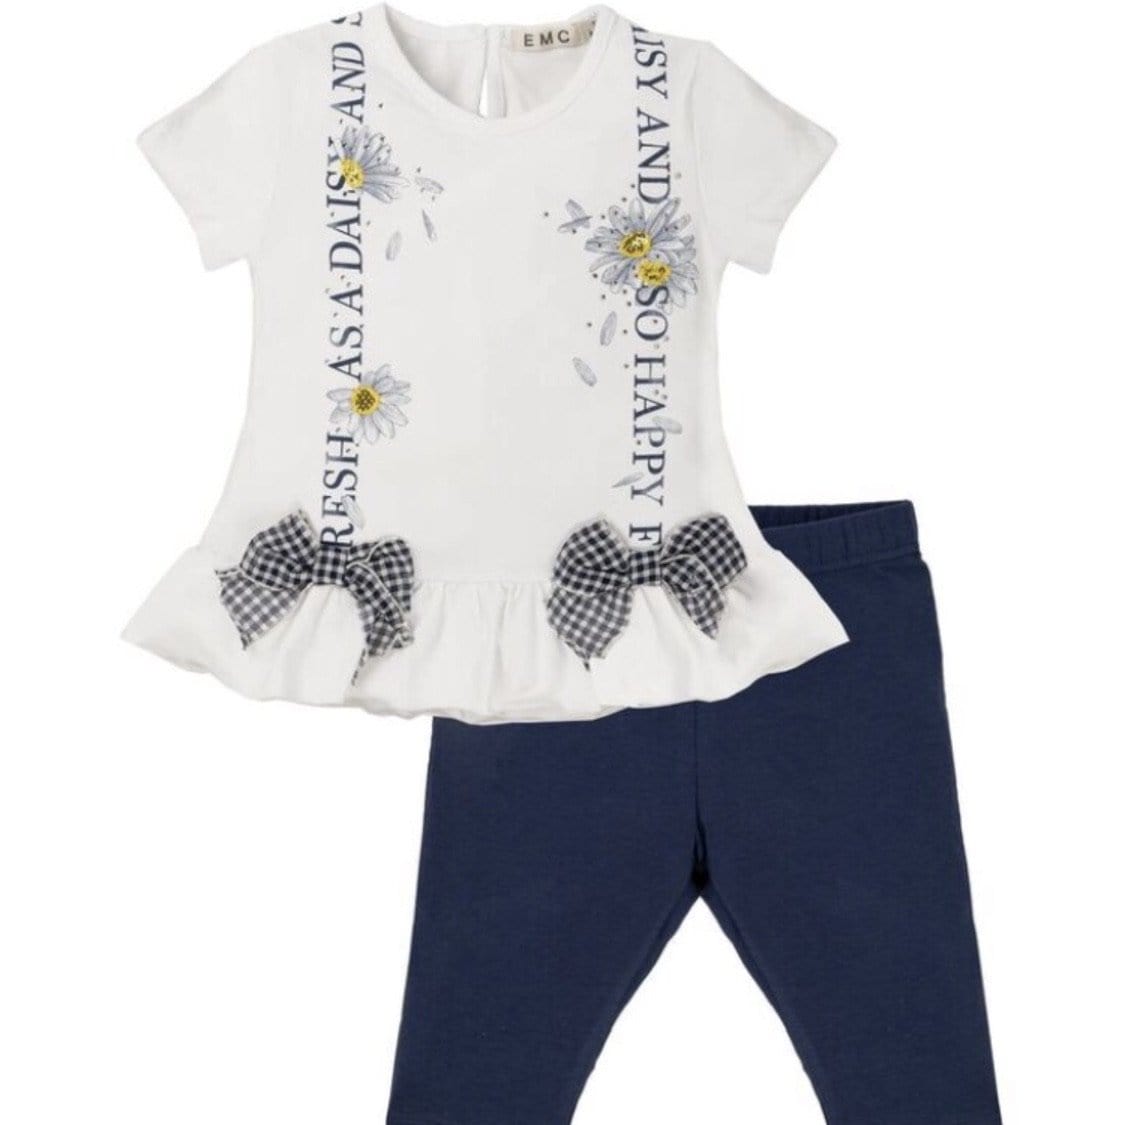 EVERYTHING MUST CHANGE DAISY CHAIN BOW TOP AND LEGGING SET